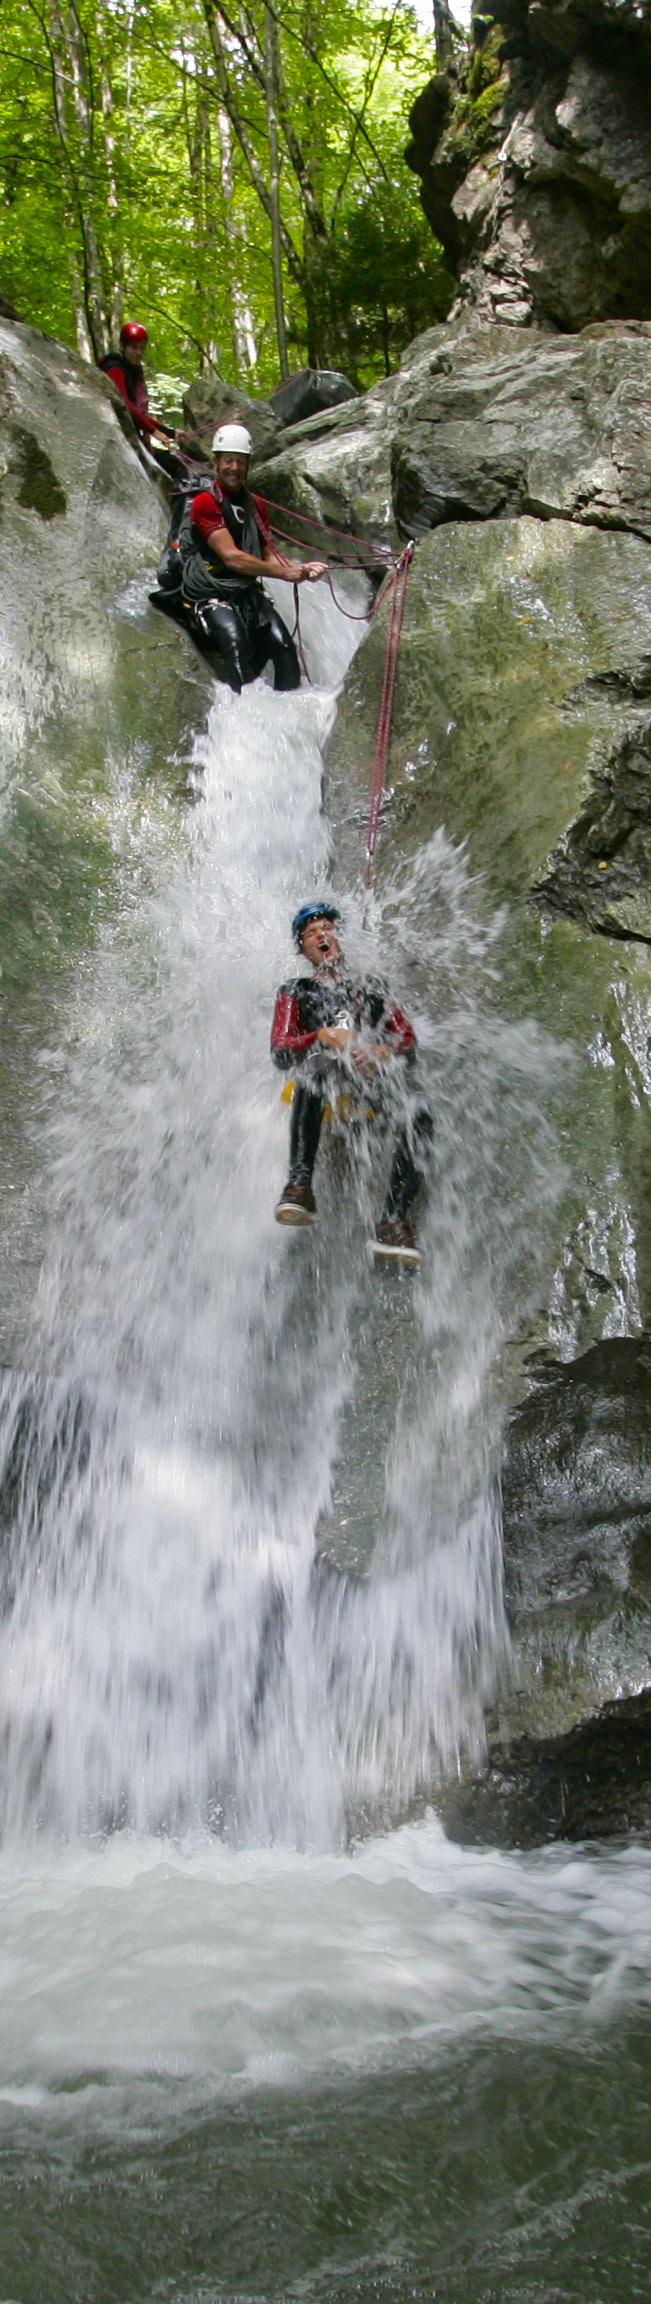 Canyoning An unmissable summer activity for the whole family Ready to try something refreshingly new?